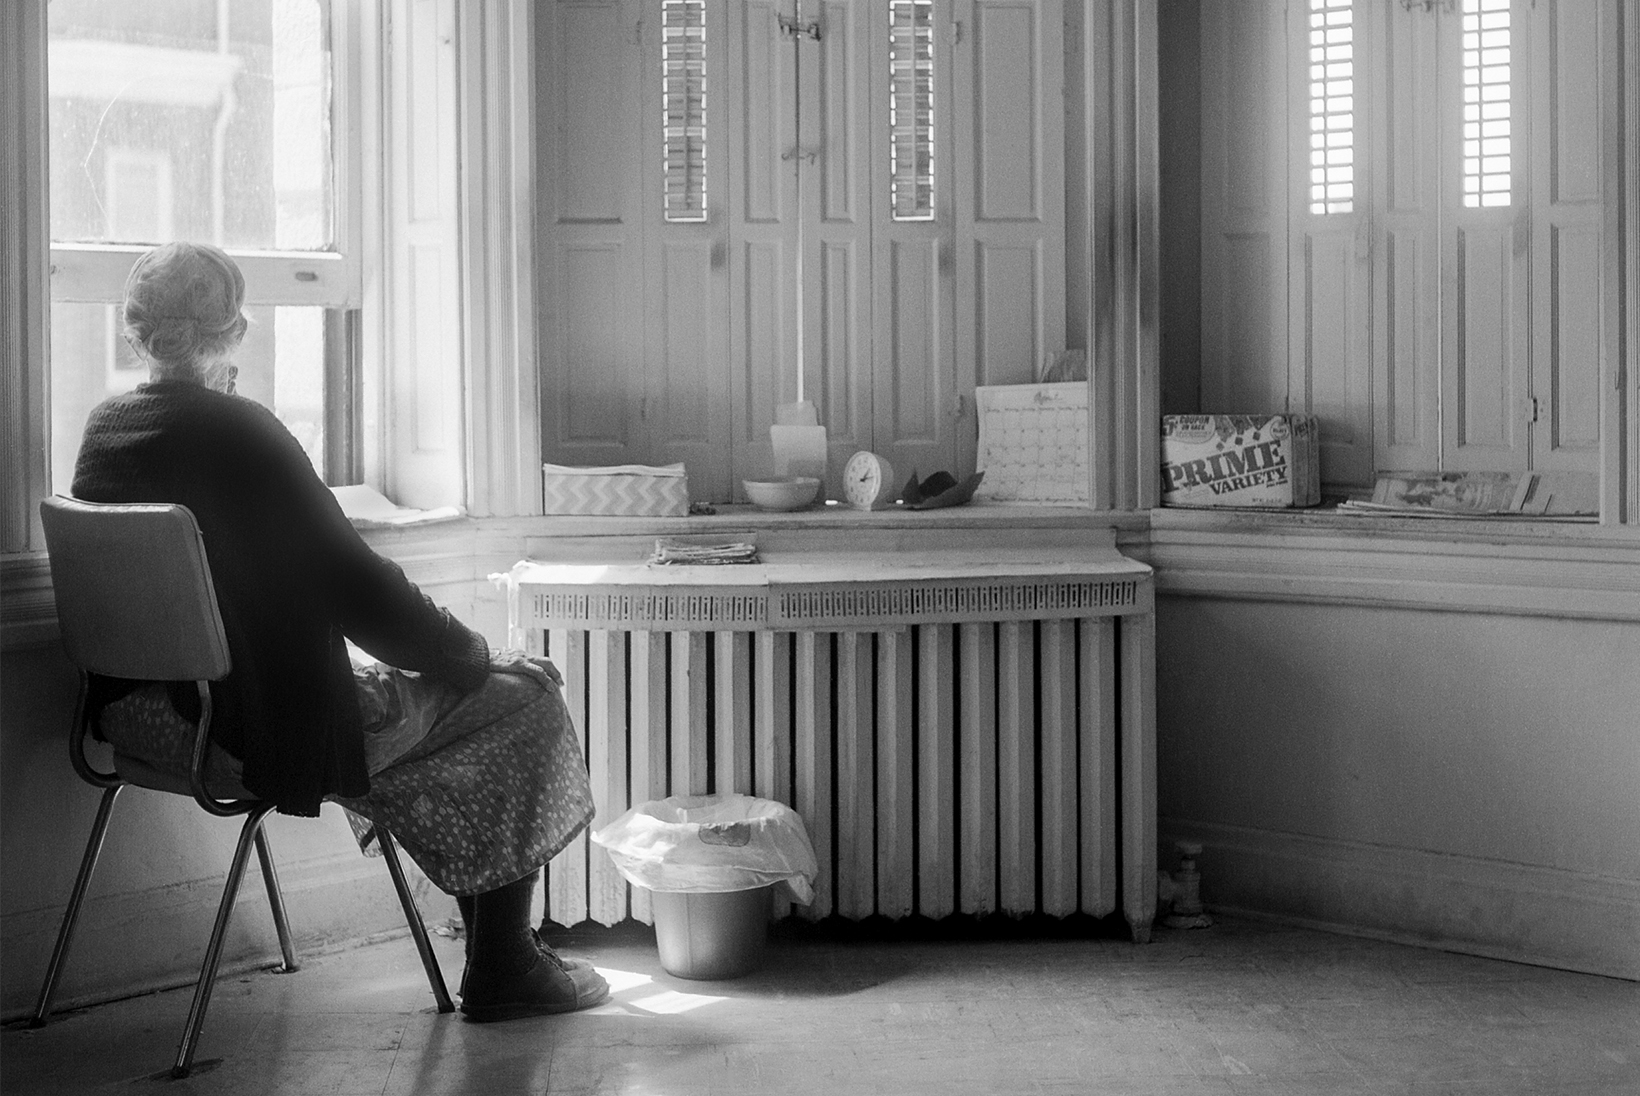 An old woman, with her hair in a bun and wearing a dress and sweater, sits in a chair and looks out of the window. The room has a steam radiator air vent, tall windows with interior shutters, a small wastebasket, and personal items on the windowsill.